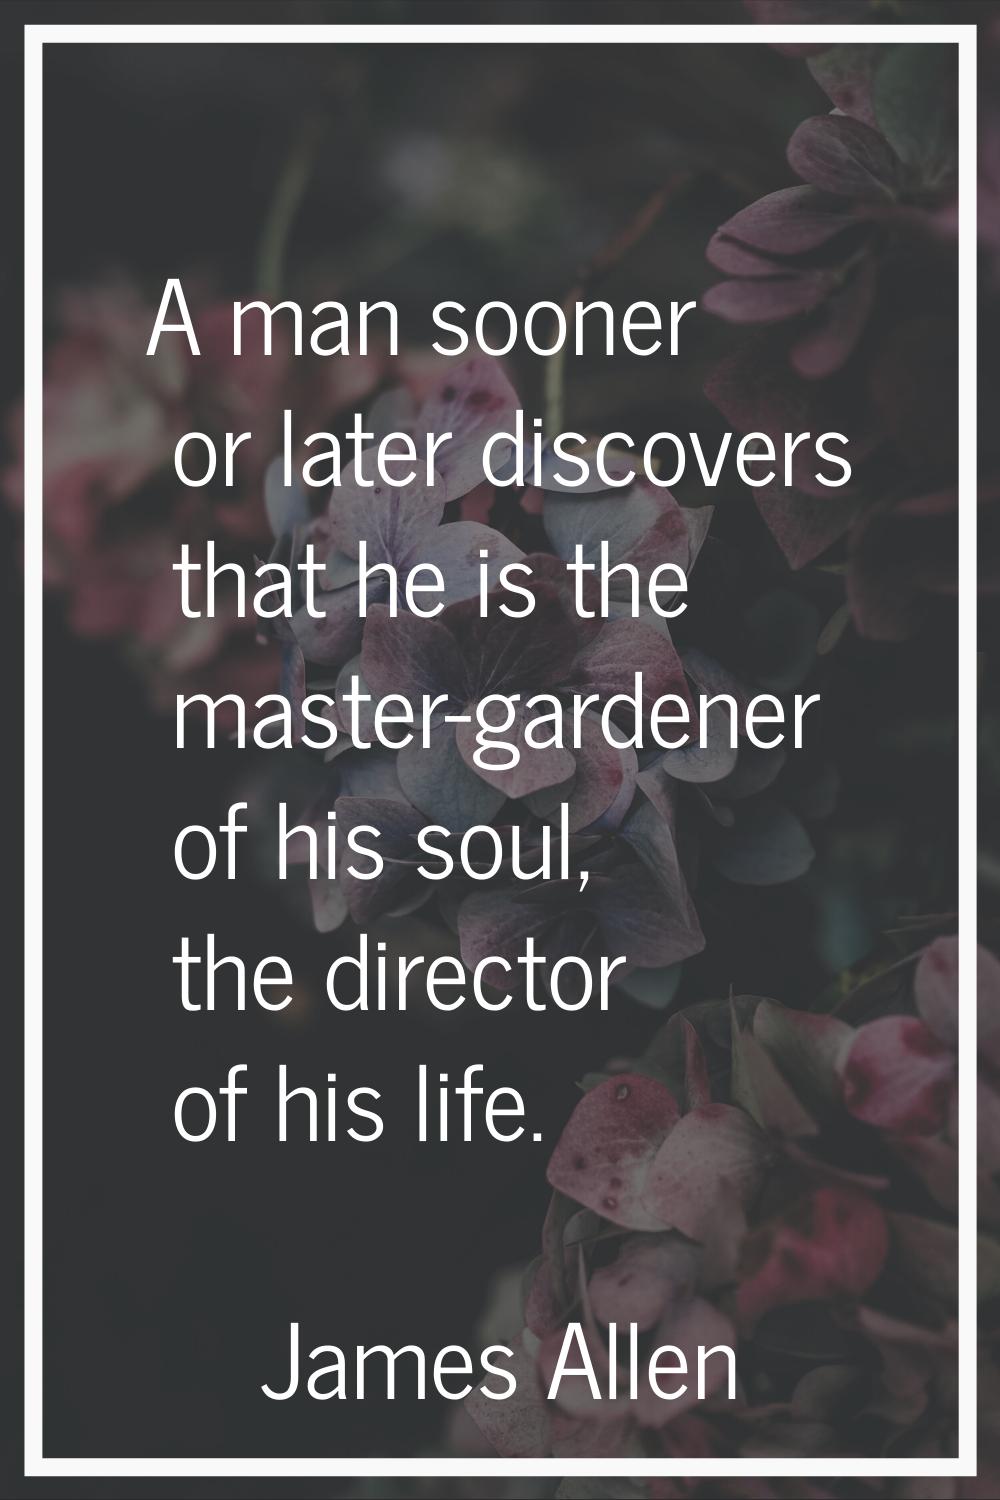 A man sooner or later discovers that he is the master-gardener of his soul, the director of his lif